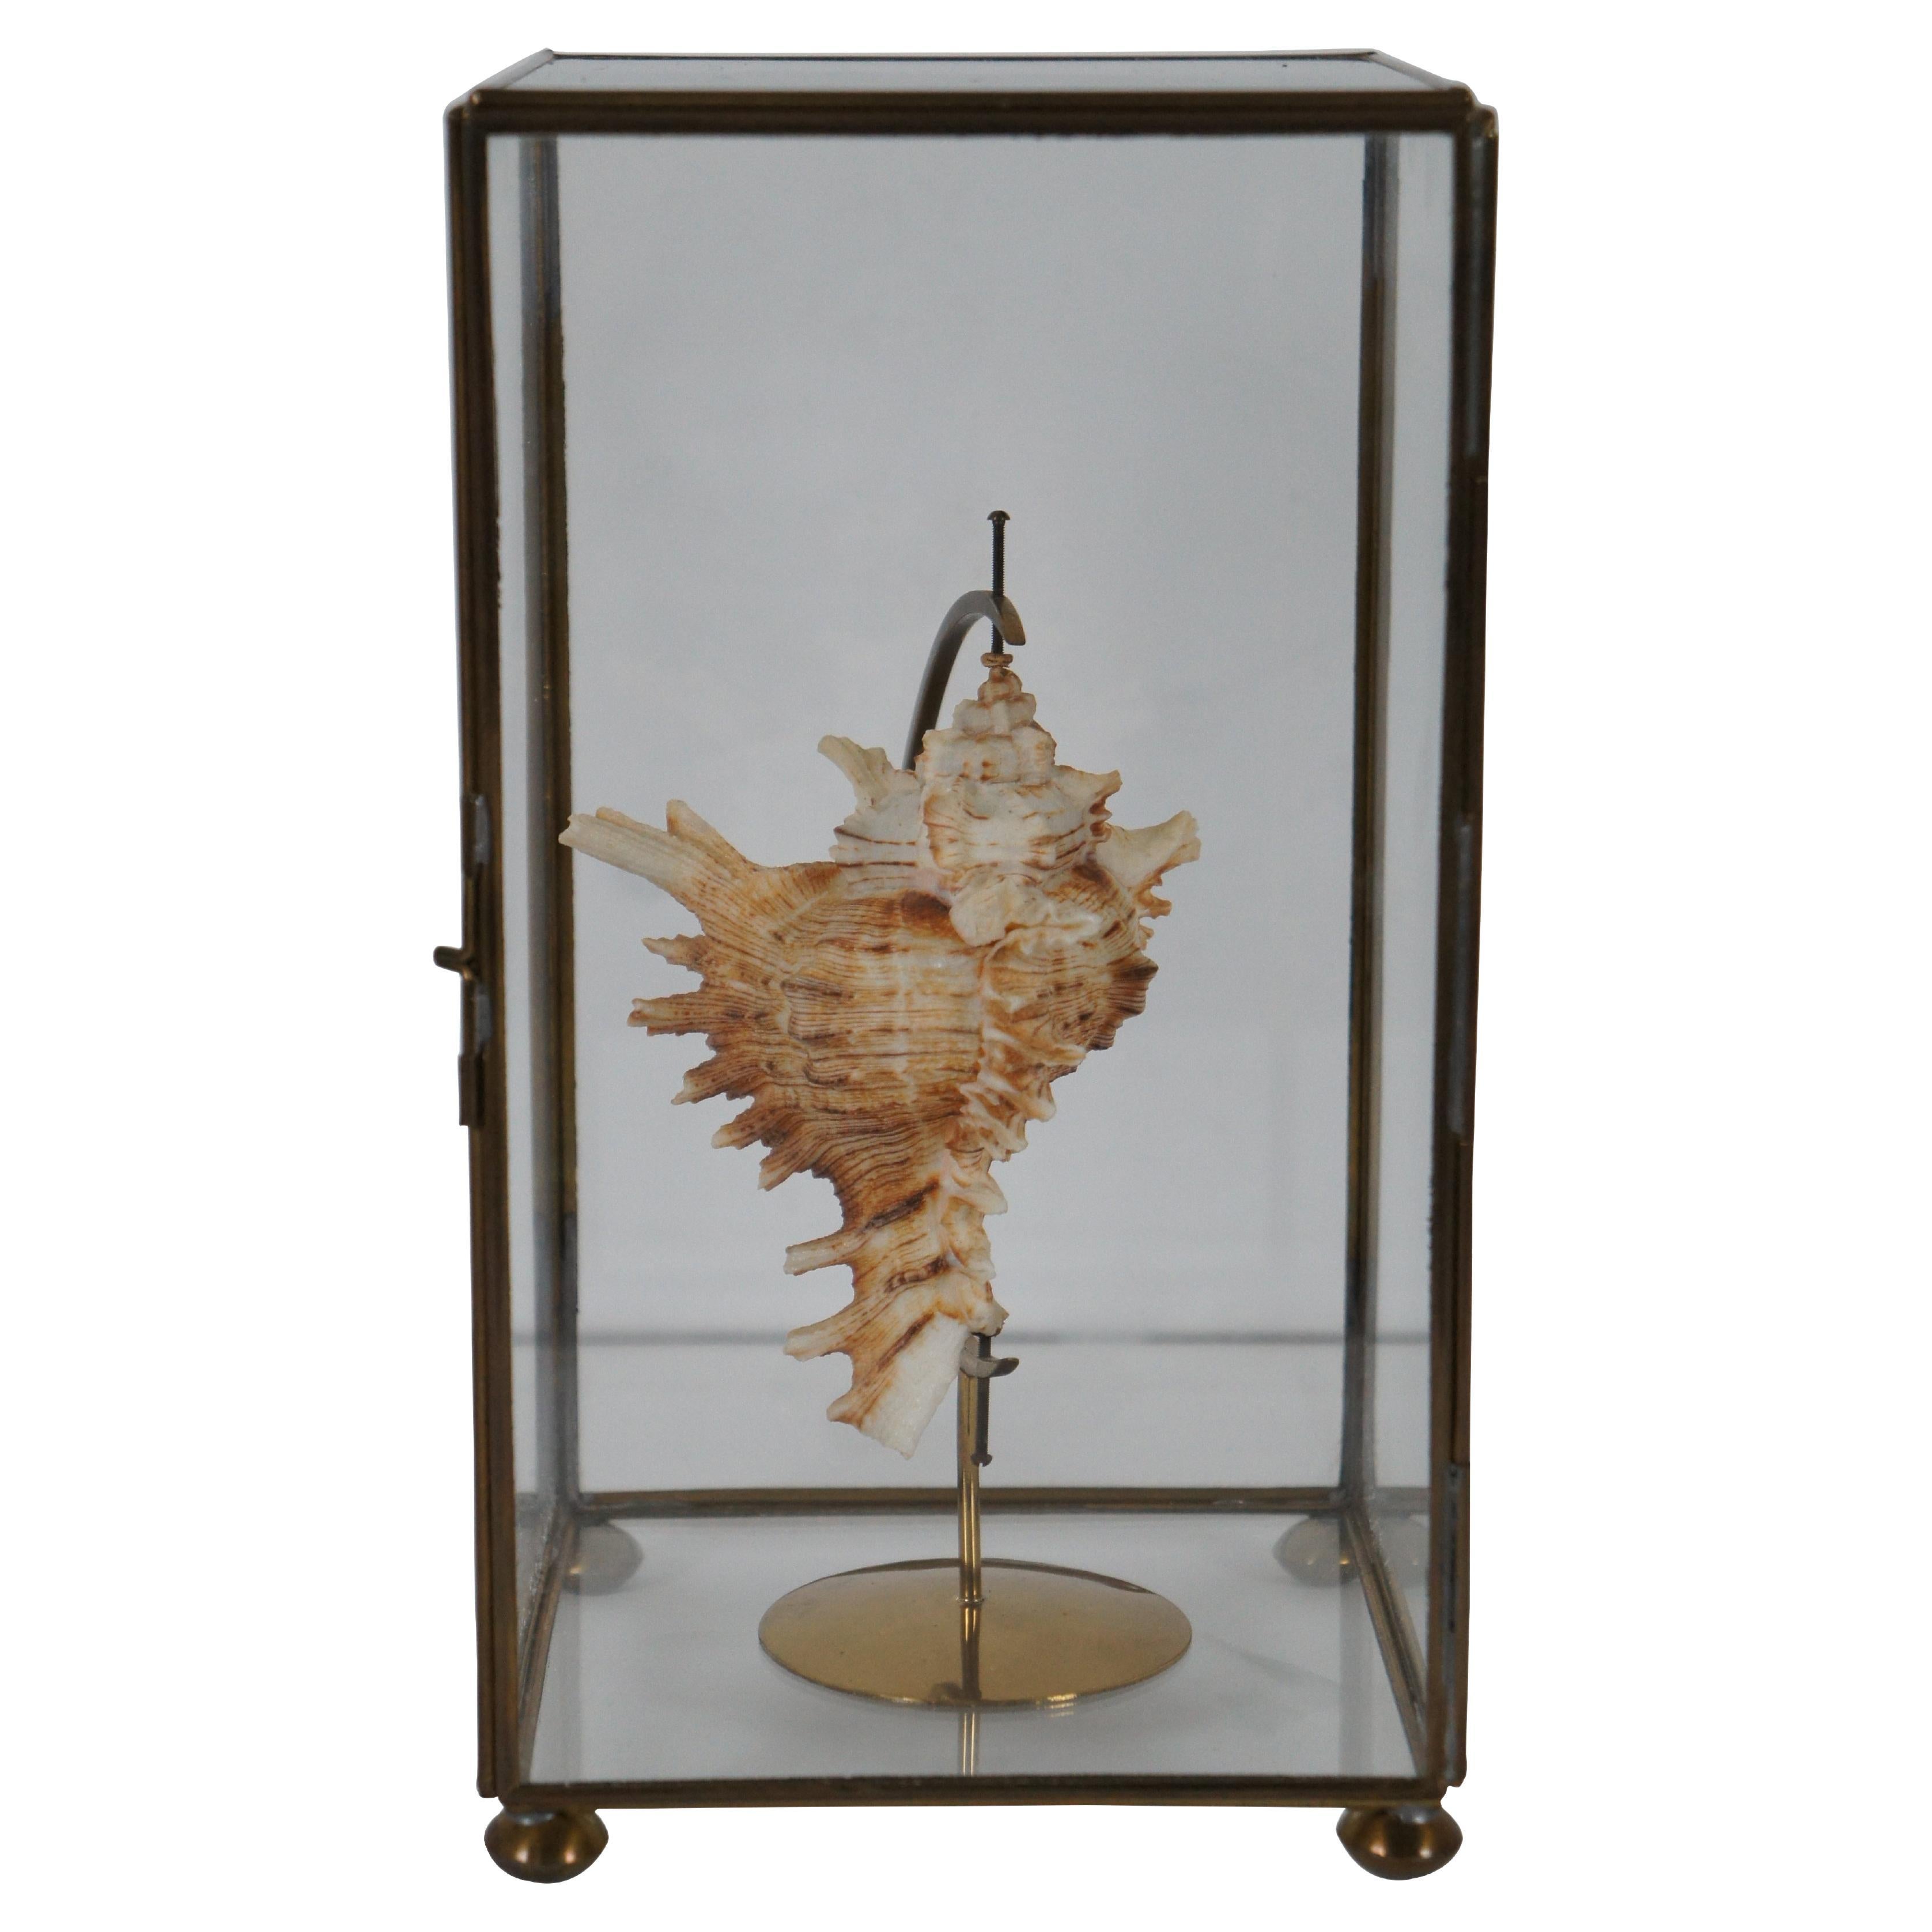 Vintage Spiked Conch Shell Brass Stand Glass Showcase Curio Casket Display 9"" (en anglais) en vente